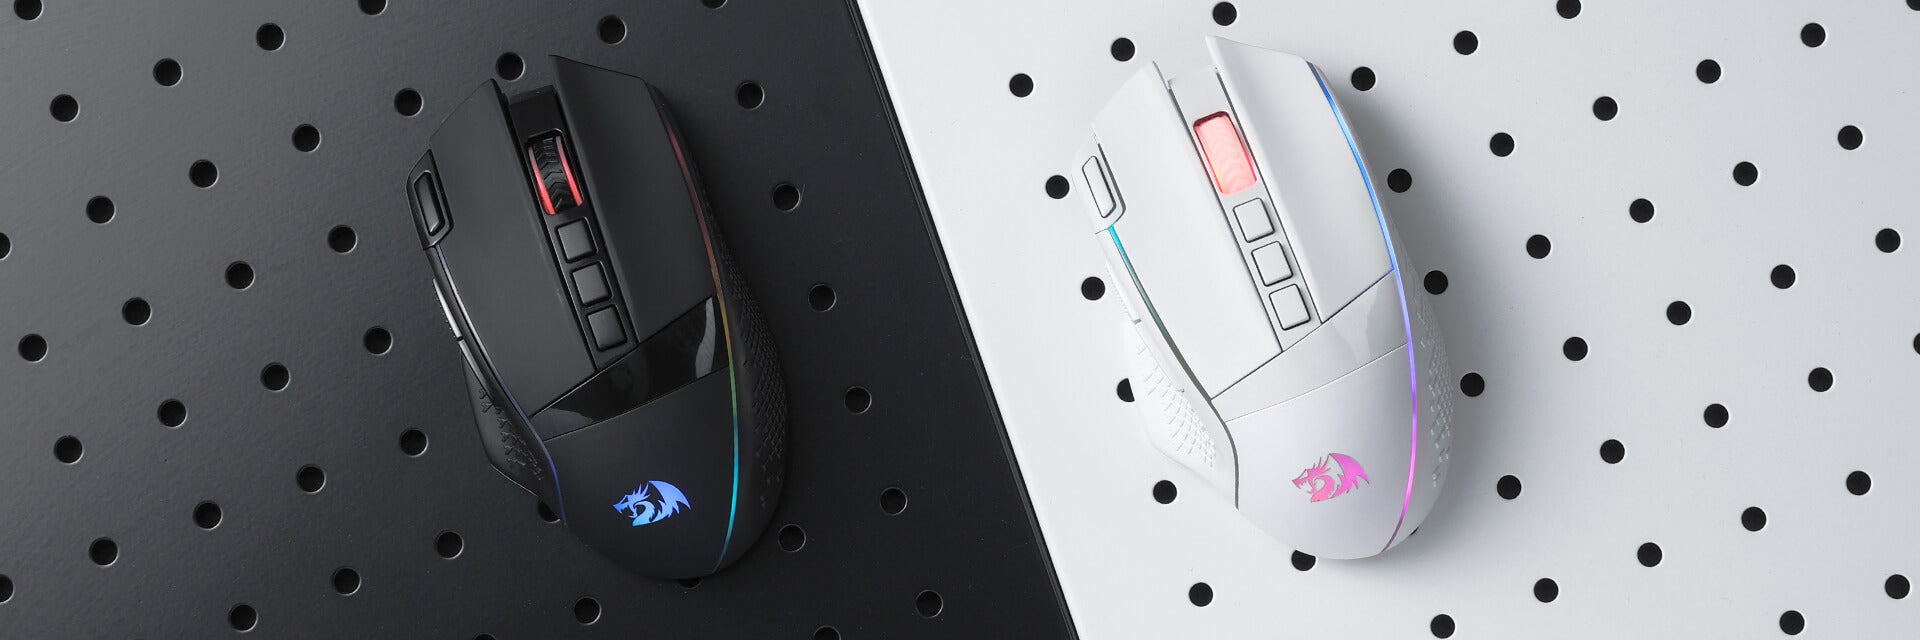 Redragon_M991_RGB_Wireless_FPS_Gaming_Mouse